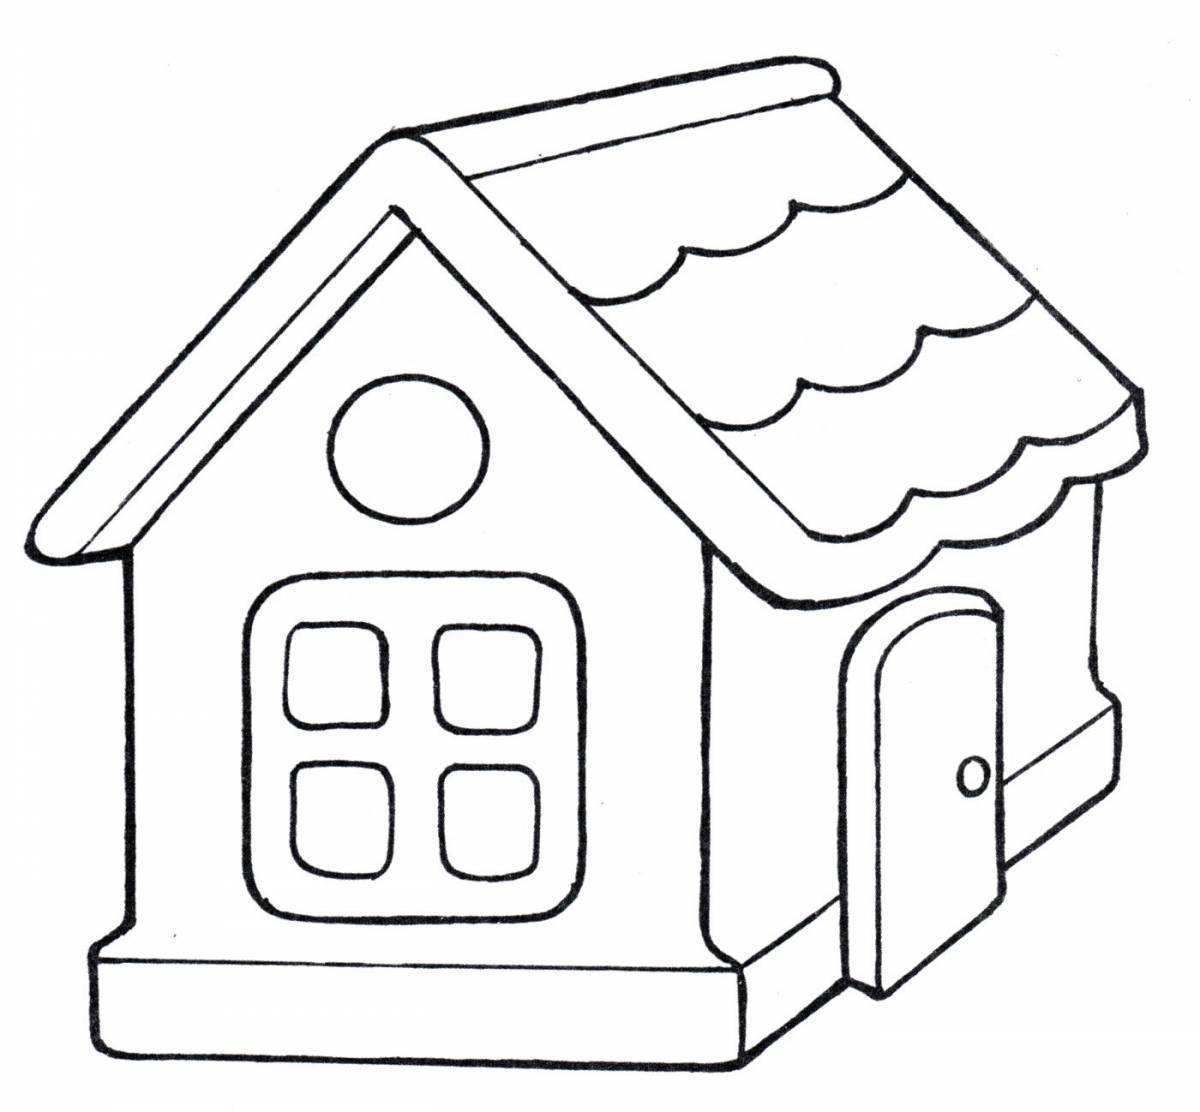 Coloring page joyful house for kids